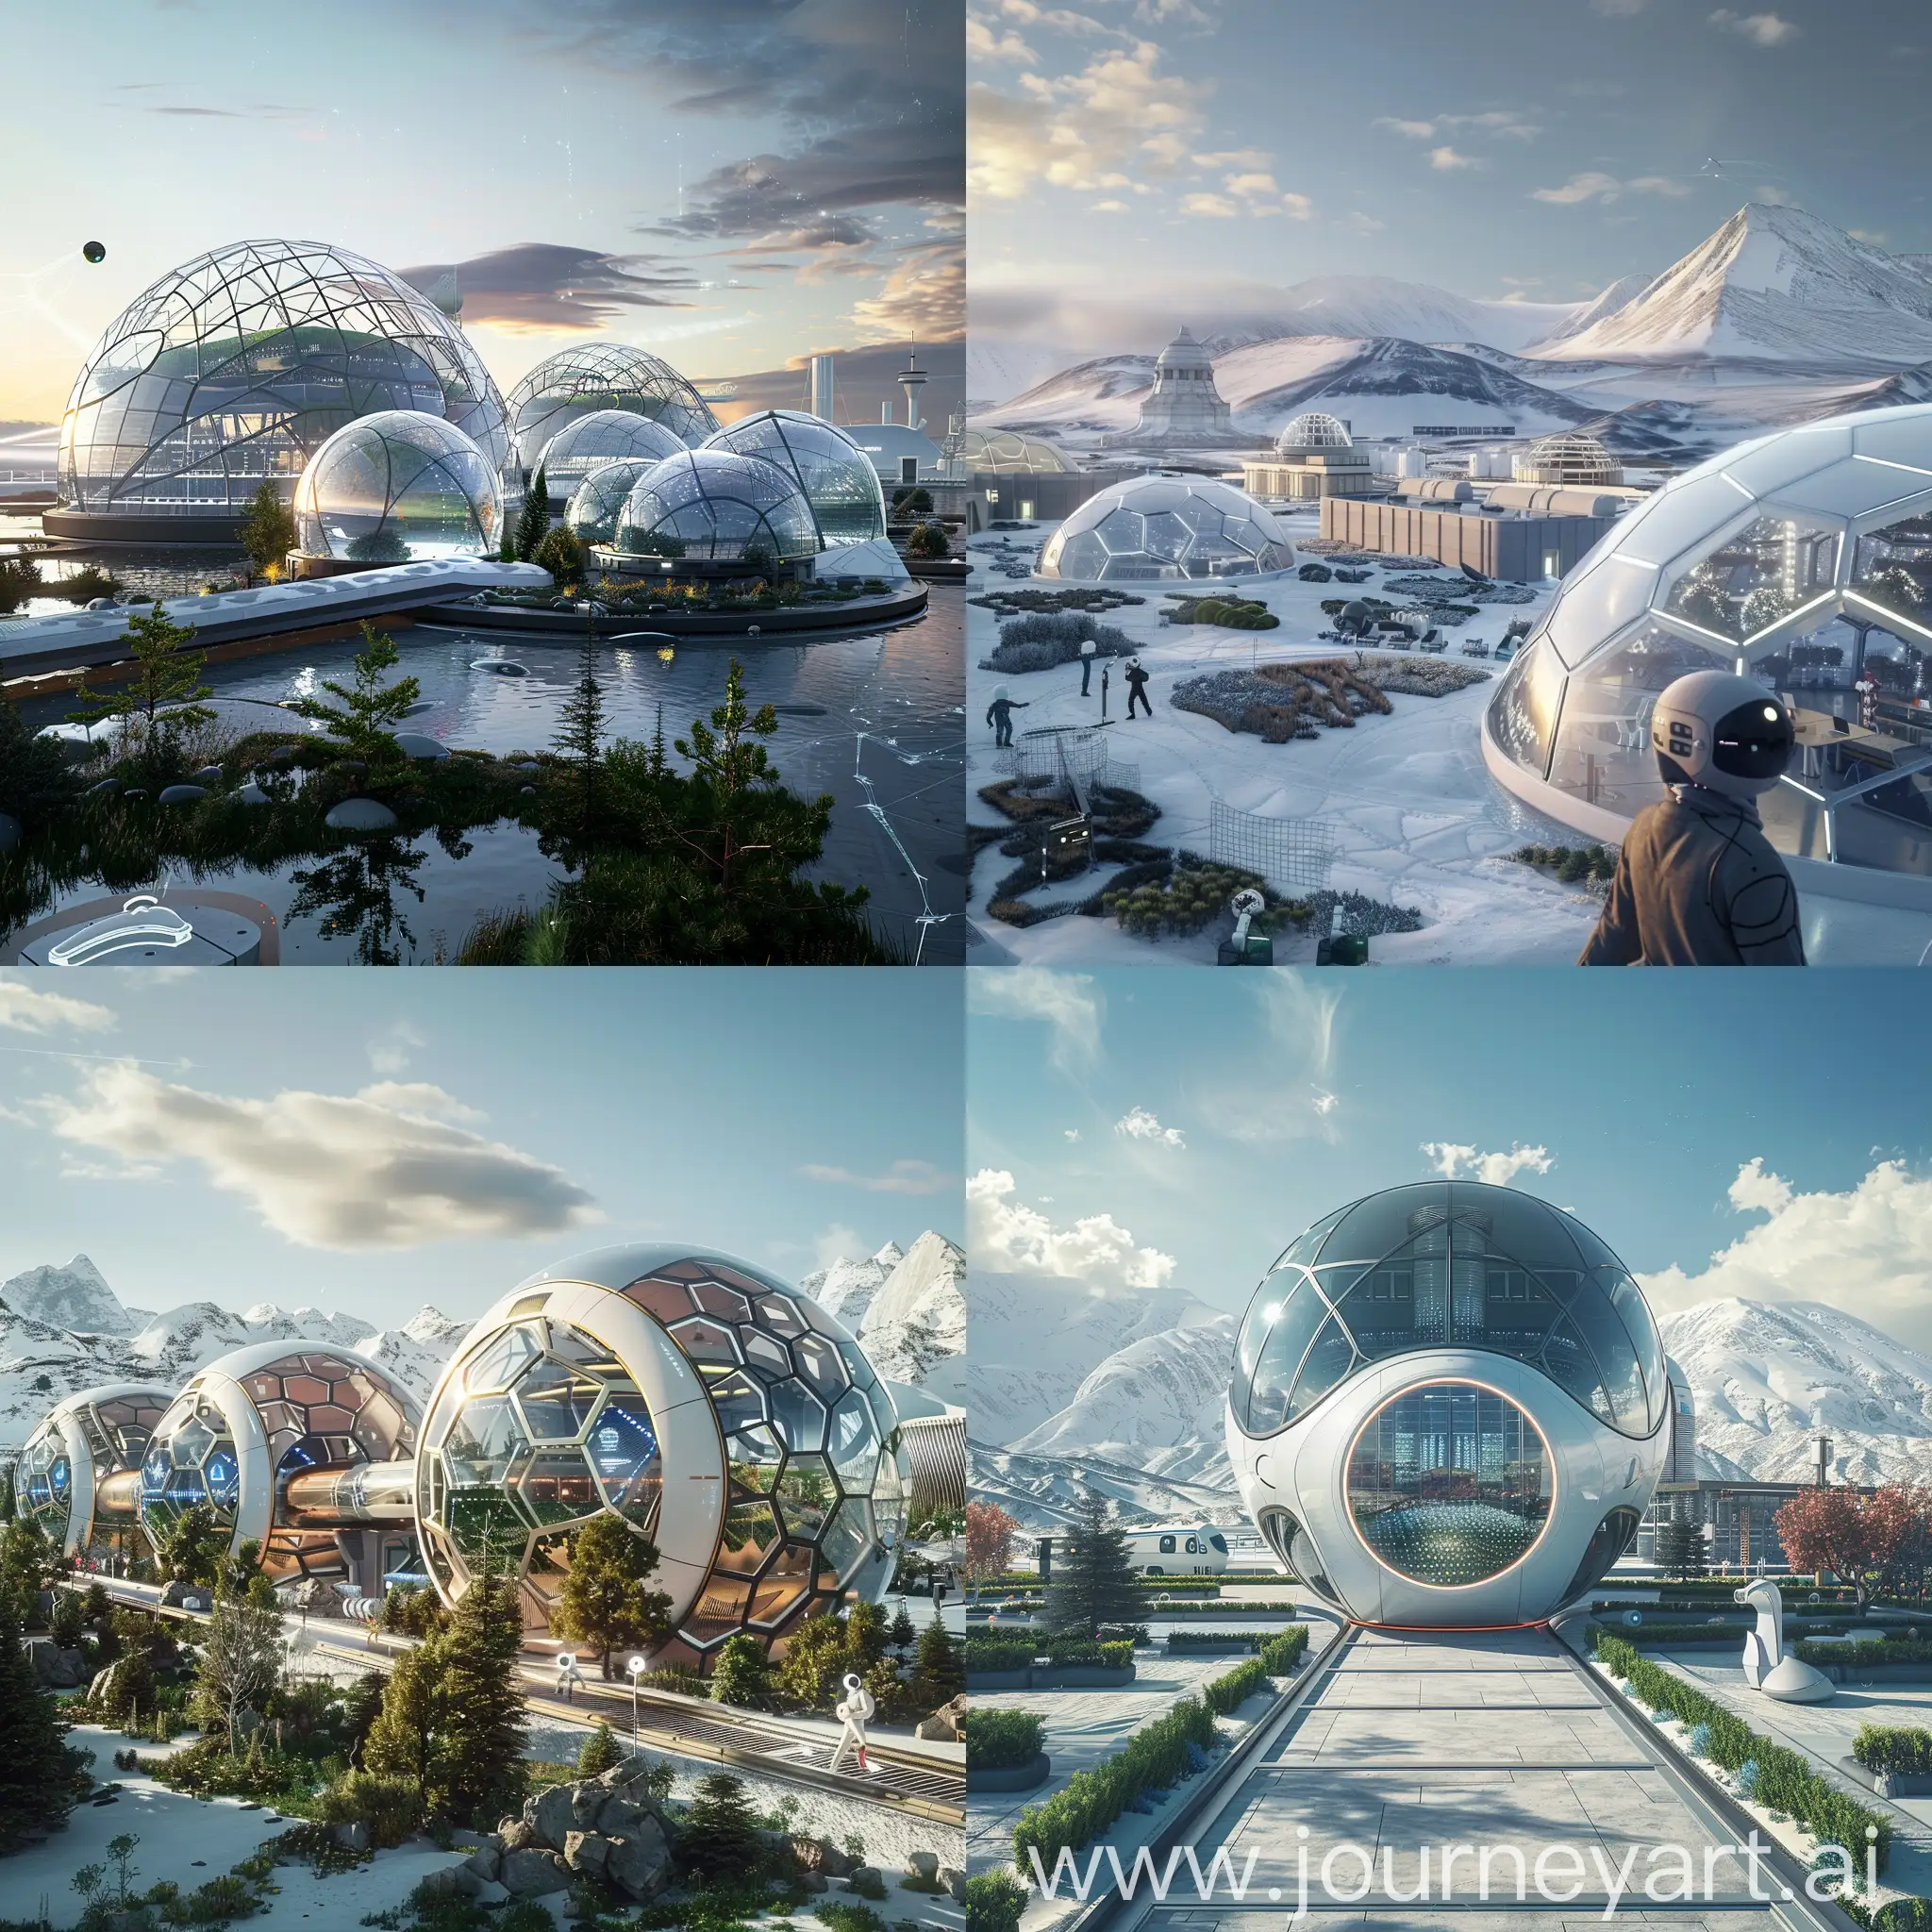 Futuristic Murmansk, Tesla Hyperloop Integration, WeWork Meets Biosphere 2, Star Trek Holographic Interfaces, SpaceX Starlink for Seamless Connectivity, Blade Runner-esque Vertical Farms, Amazon's Alexa on Steroids, Apple's Minimalist Sustainability, Boston Dynamics Robots for Everyday Life, Microsoft HoloLens for Education and Training, Blue Origin's Space Tourism Inspiration, SolarSea's Ocean Energy Farms, Zaha Hadid Architects' Bold Biomimicry, SkyTran's Elevated Pod Transportation, Bigelow Aerospace's Inflatable Habitat, Elon Musk's Hyperloop Tunnels, Cloud Seeding Technology for Greener Landscape, Light Pollution Solutions by Philips, Maglev Trains by Siemens for High-Speed Travel, Vertical Cities Inspired by Shimizu Corporation, Waste-to-Energy Plants Inspired by GE Power, unreal engine 5 --stylize 1000